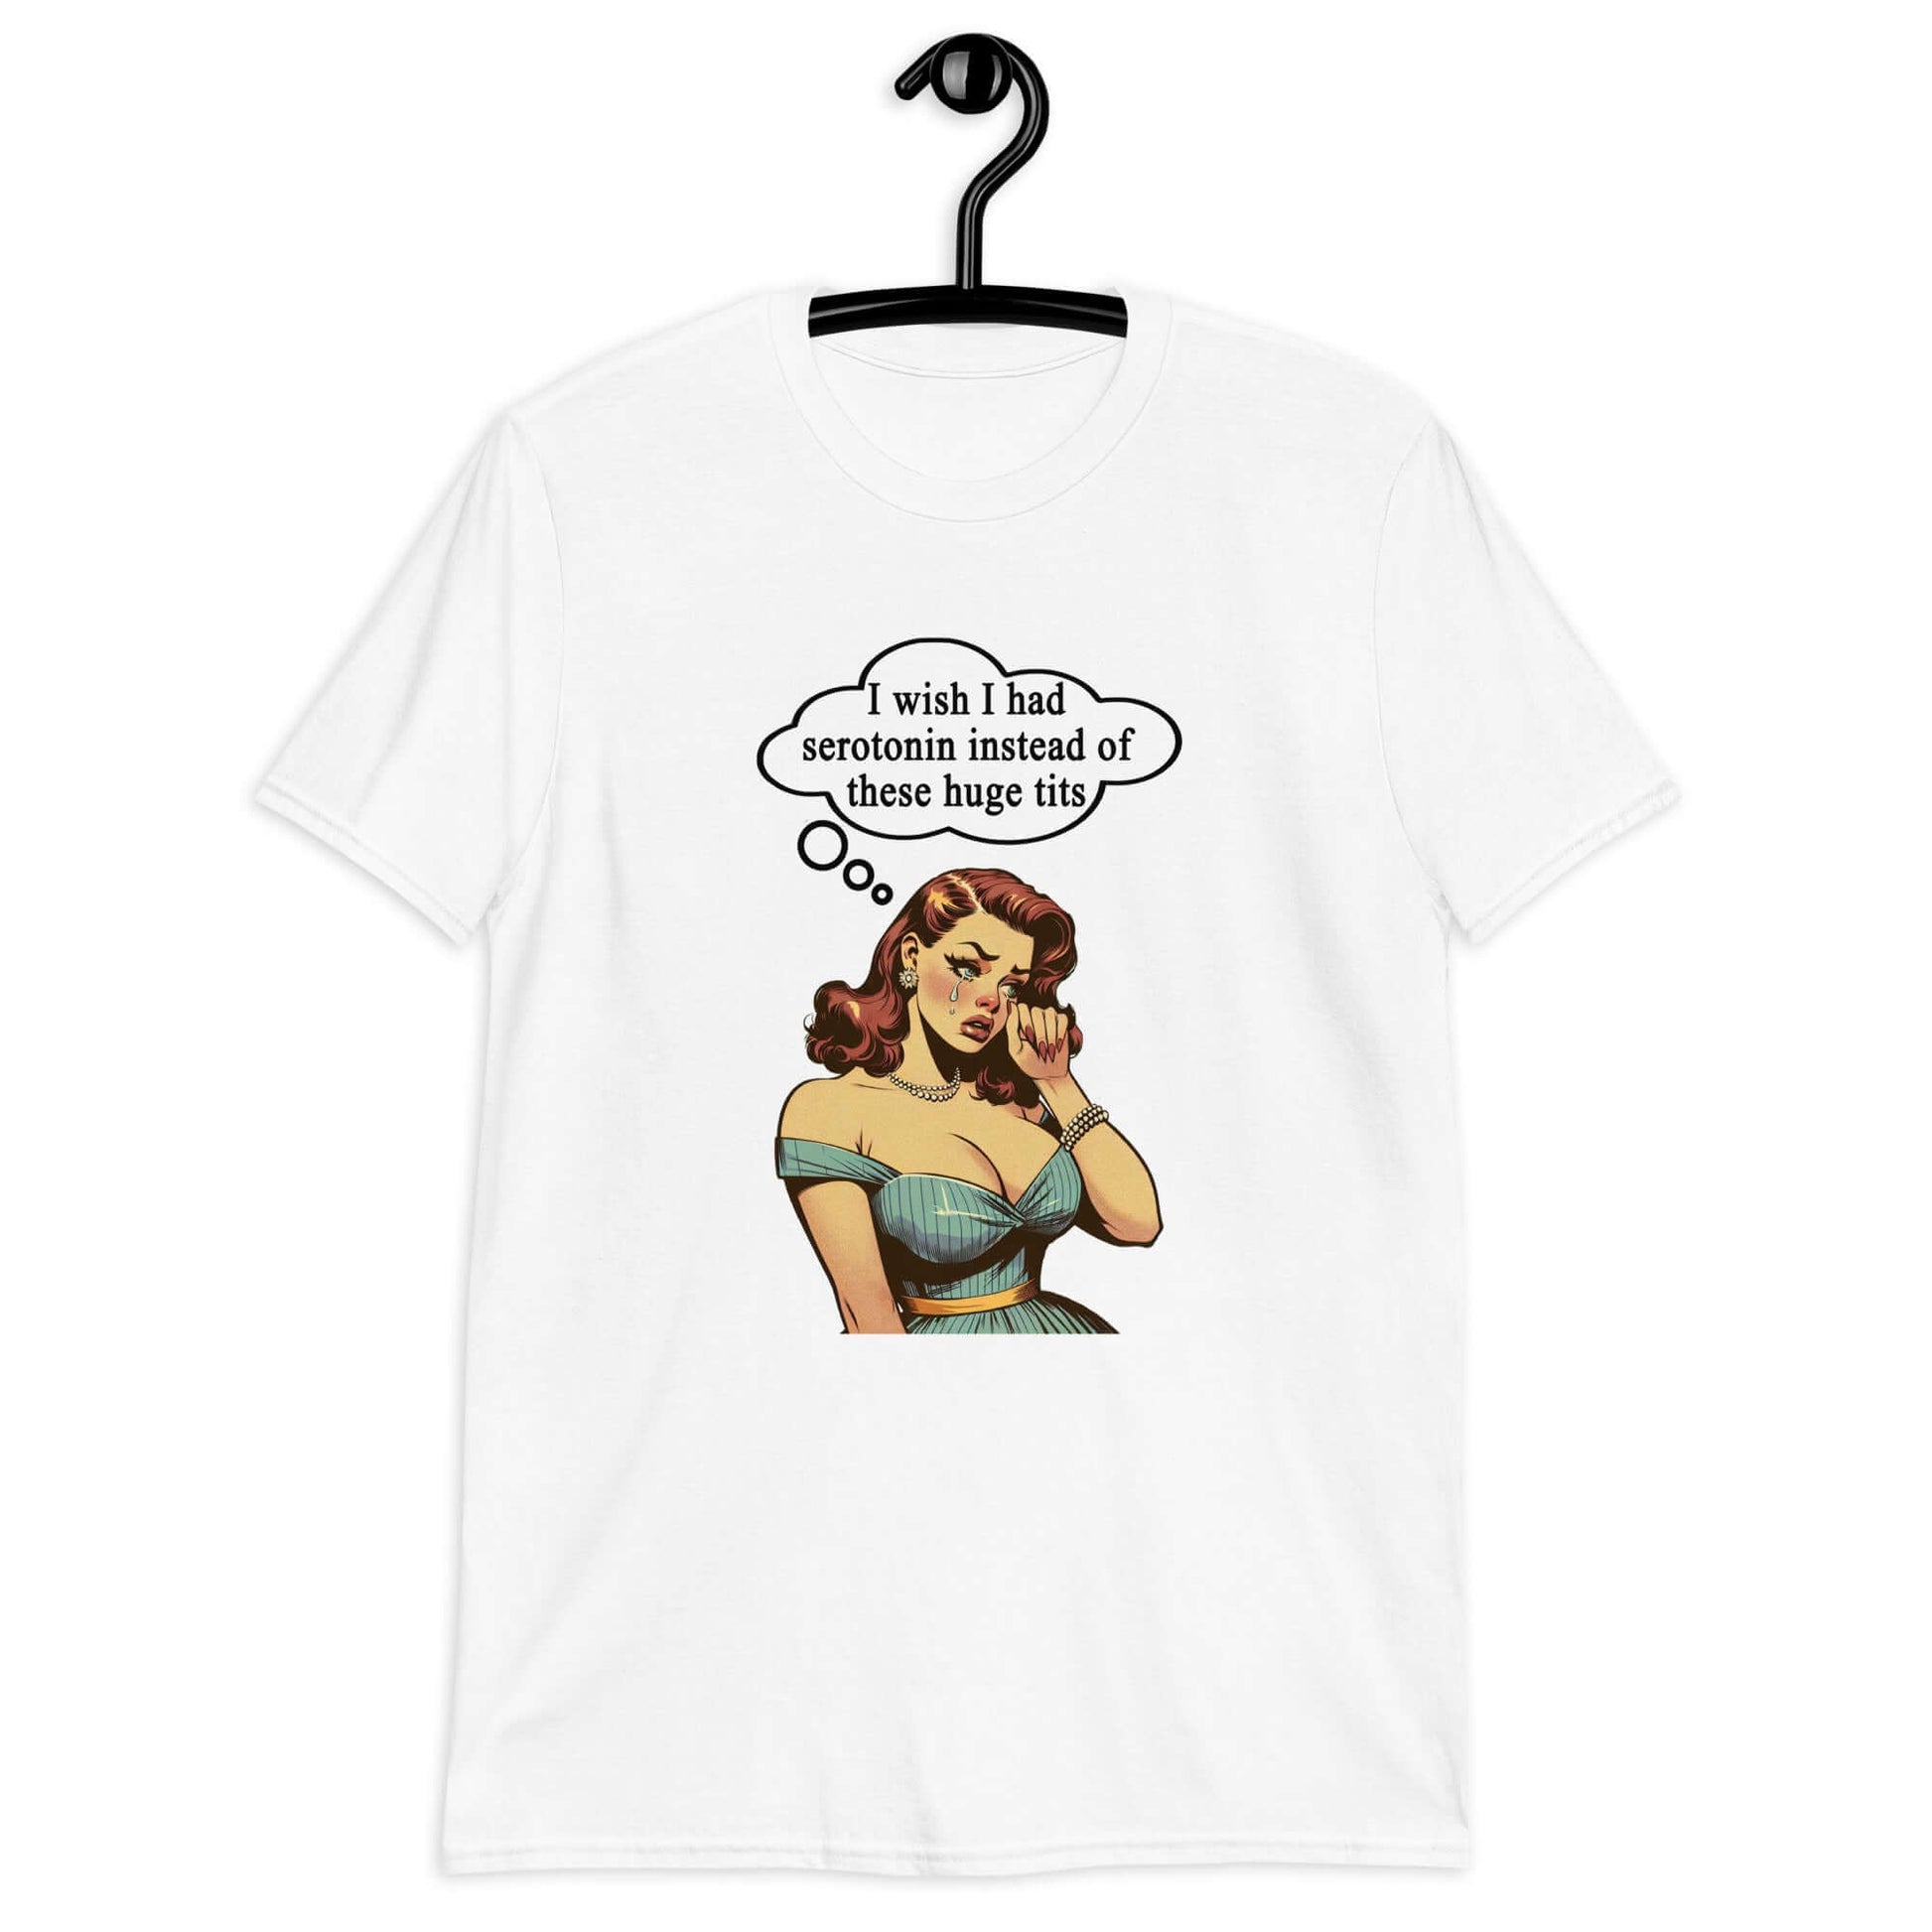 White t-shirt with an image of a busty pin-up lady with thought bubble that says I wish I had serotonin instead of these huge tits printed on the front.